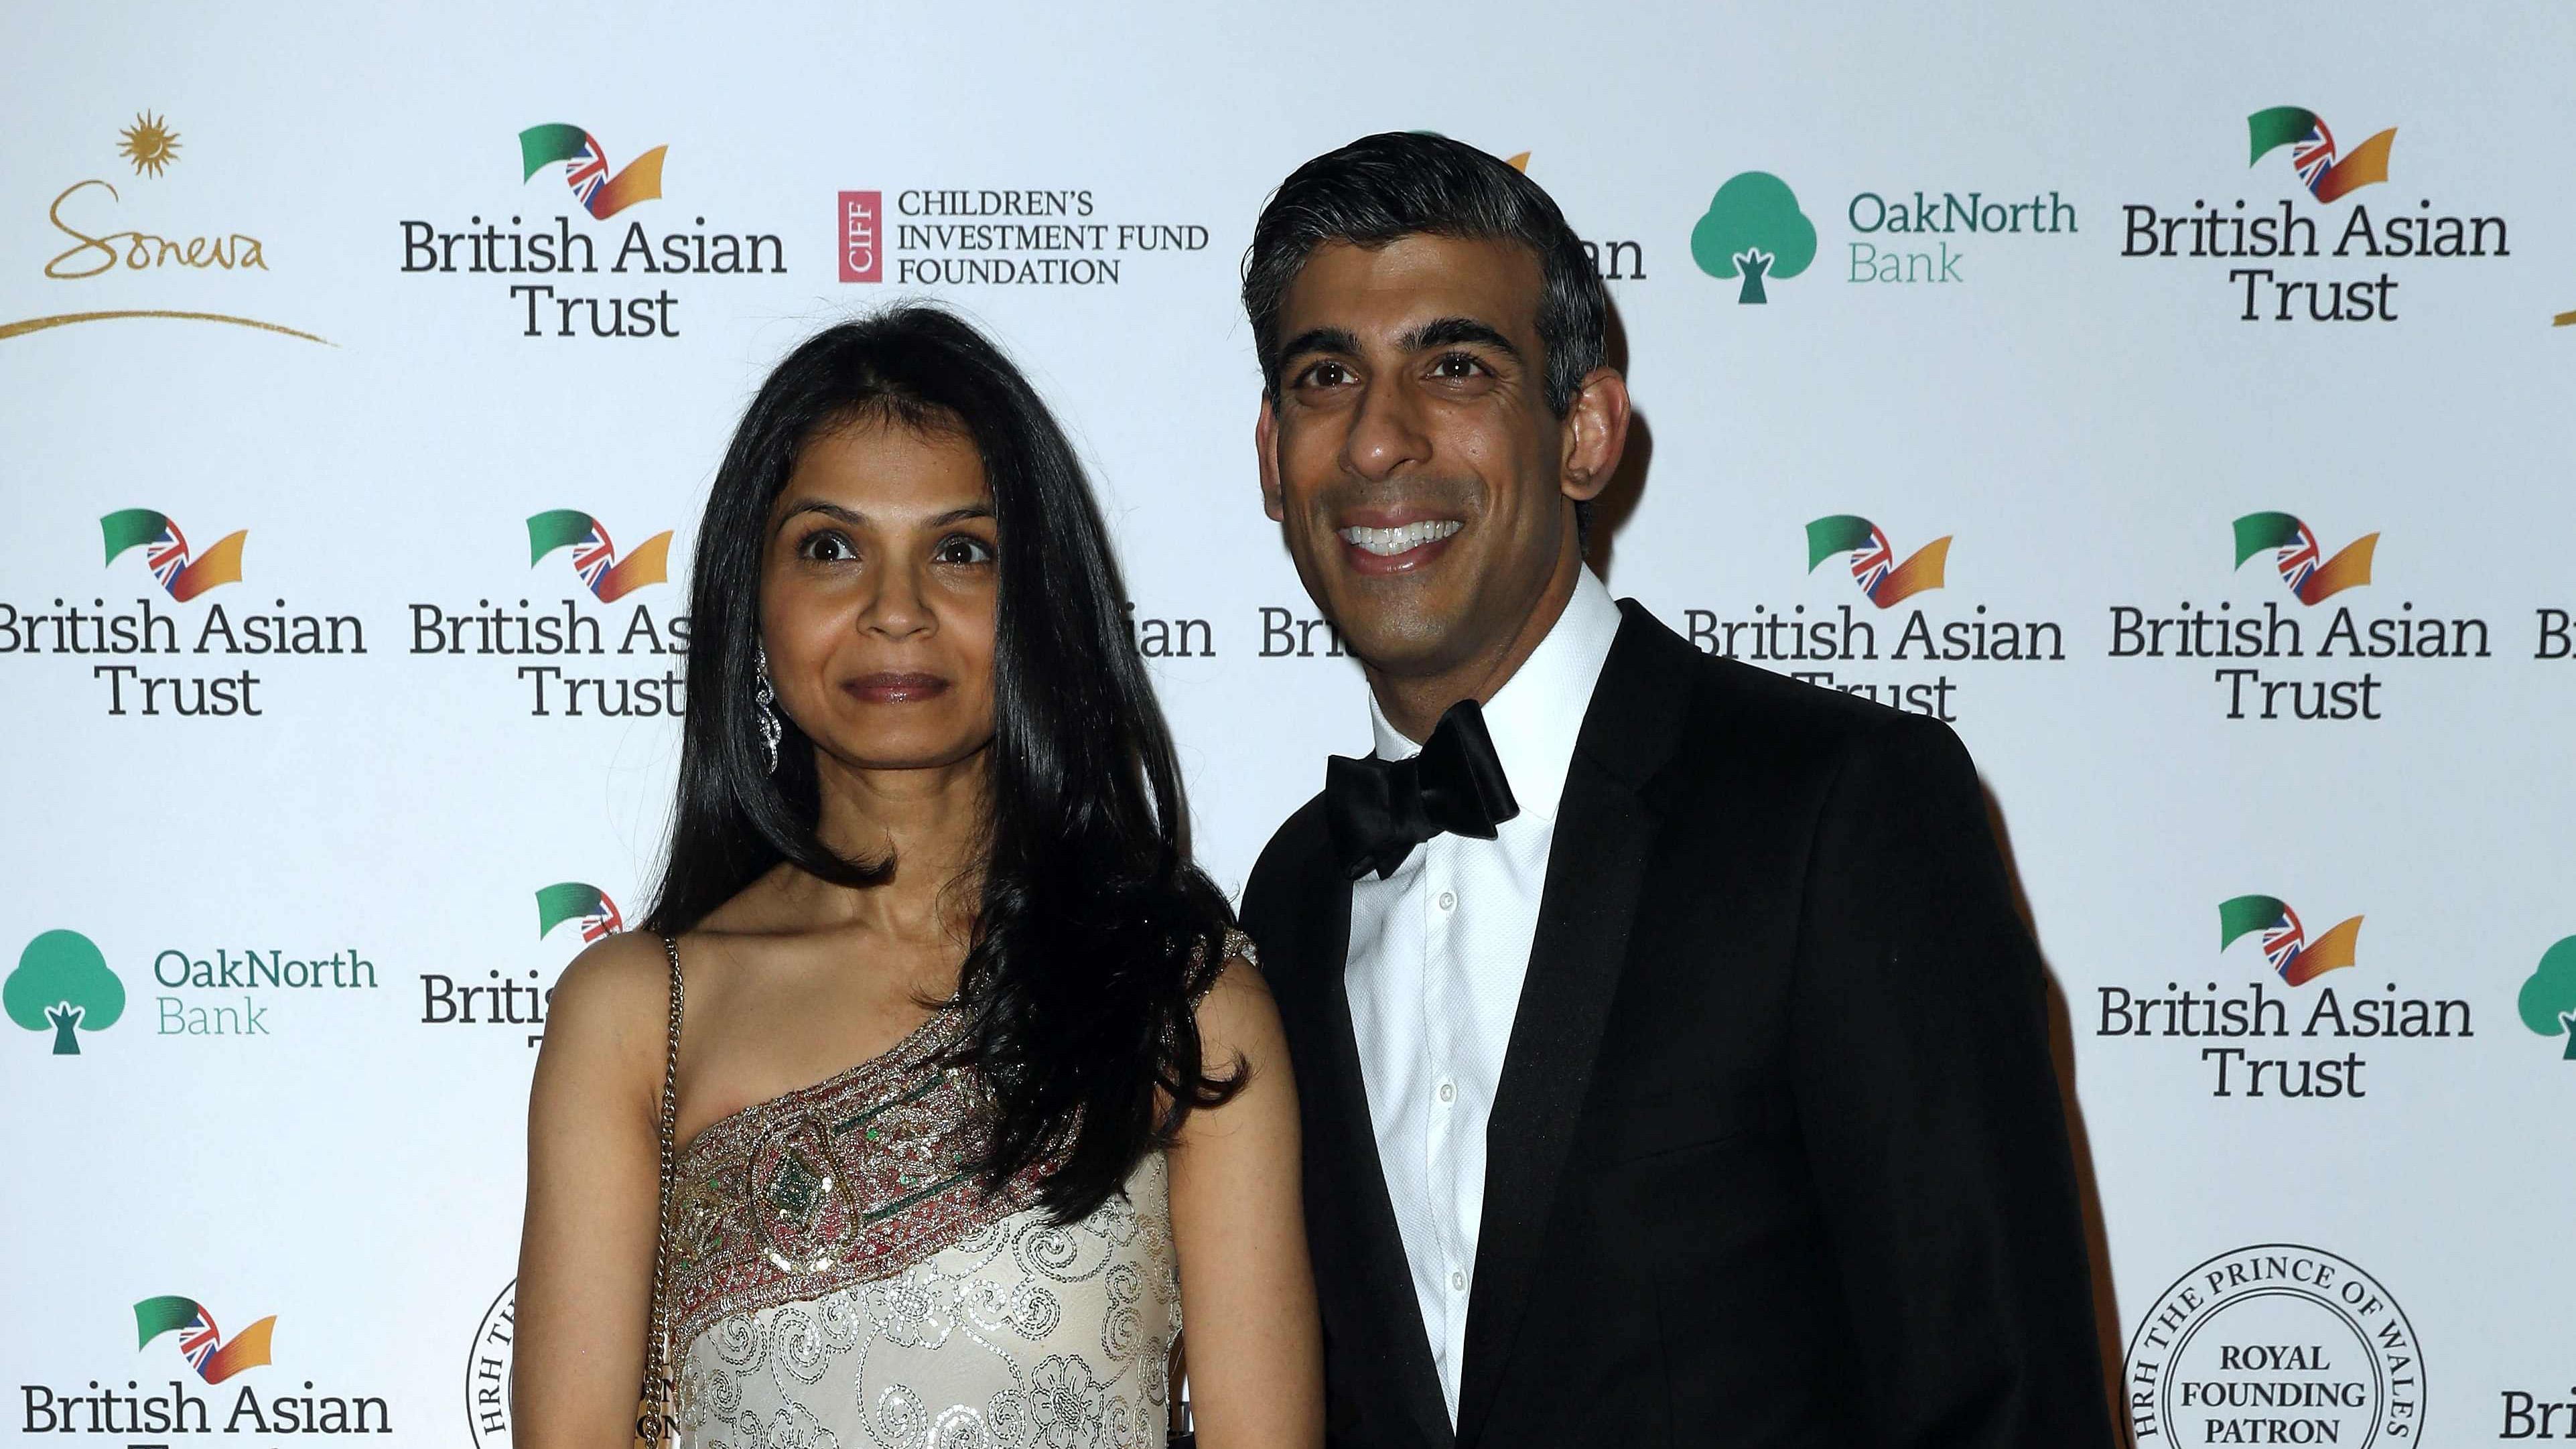 Britain's Chancellor of the Exchequer Rishi Sunak (R) poses with his wife Akshata Murty during a reception to celebrate the British Asian Trust at The British Museum in London. Credit: AFP Photo